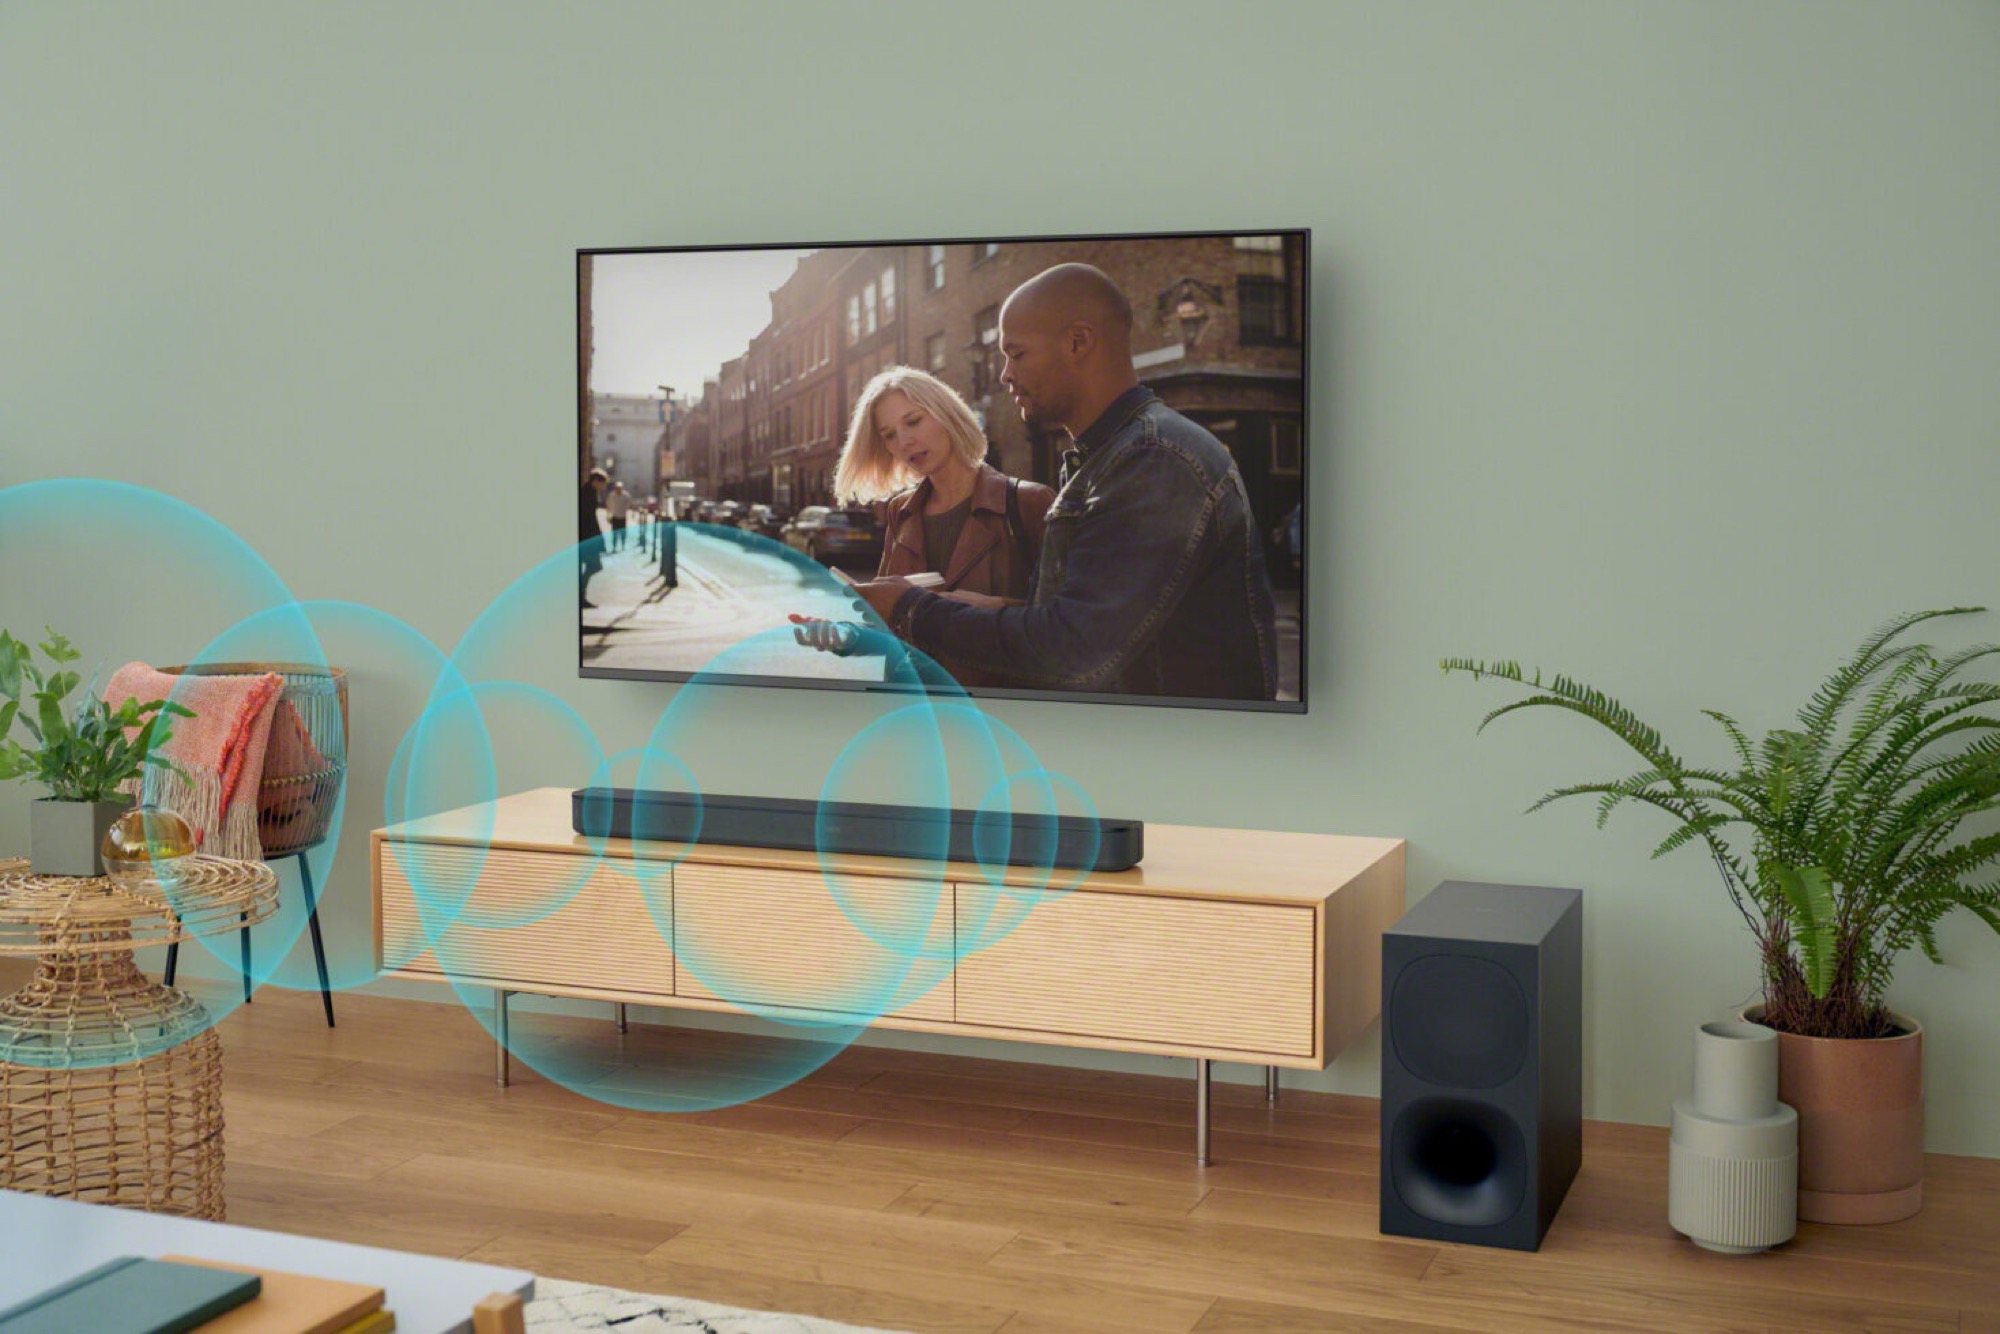 Sony HT-S400: 2.1ch soundbar announced an OLED display and surround sound for €270 - NotebookCheck.net News